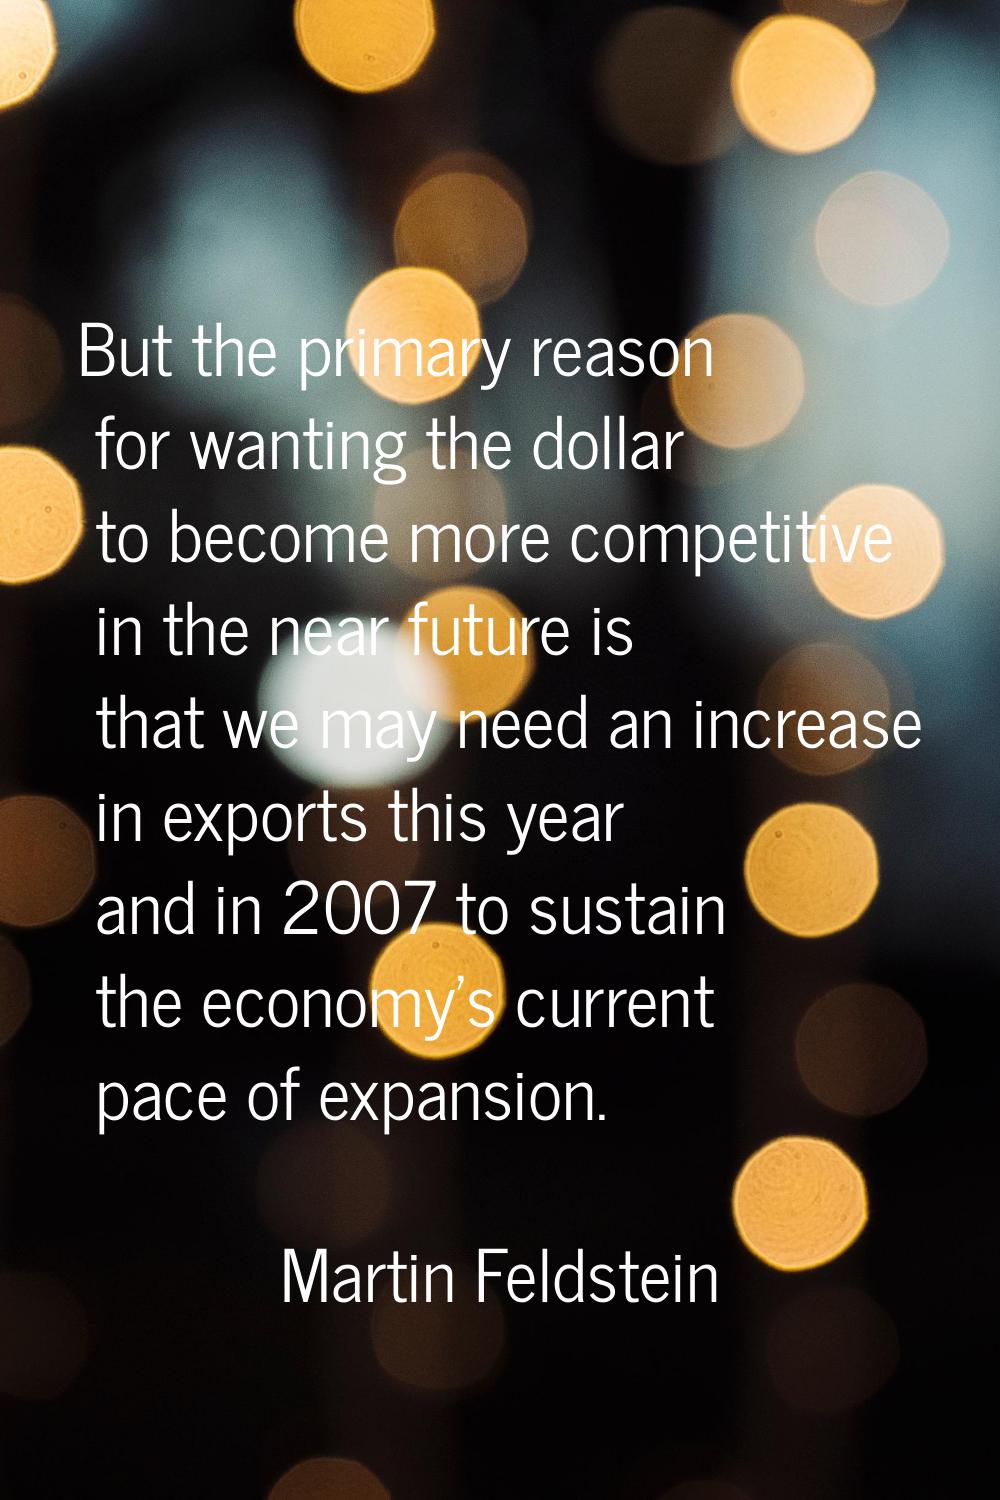 But the primary reason for wanting the dollar to become more competitive in the near future is that